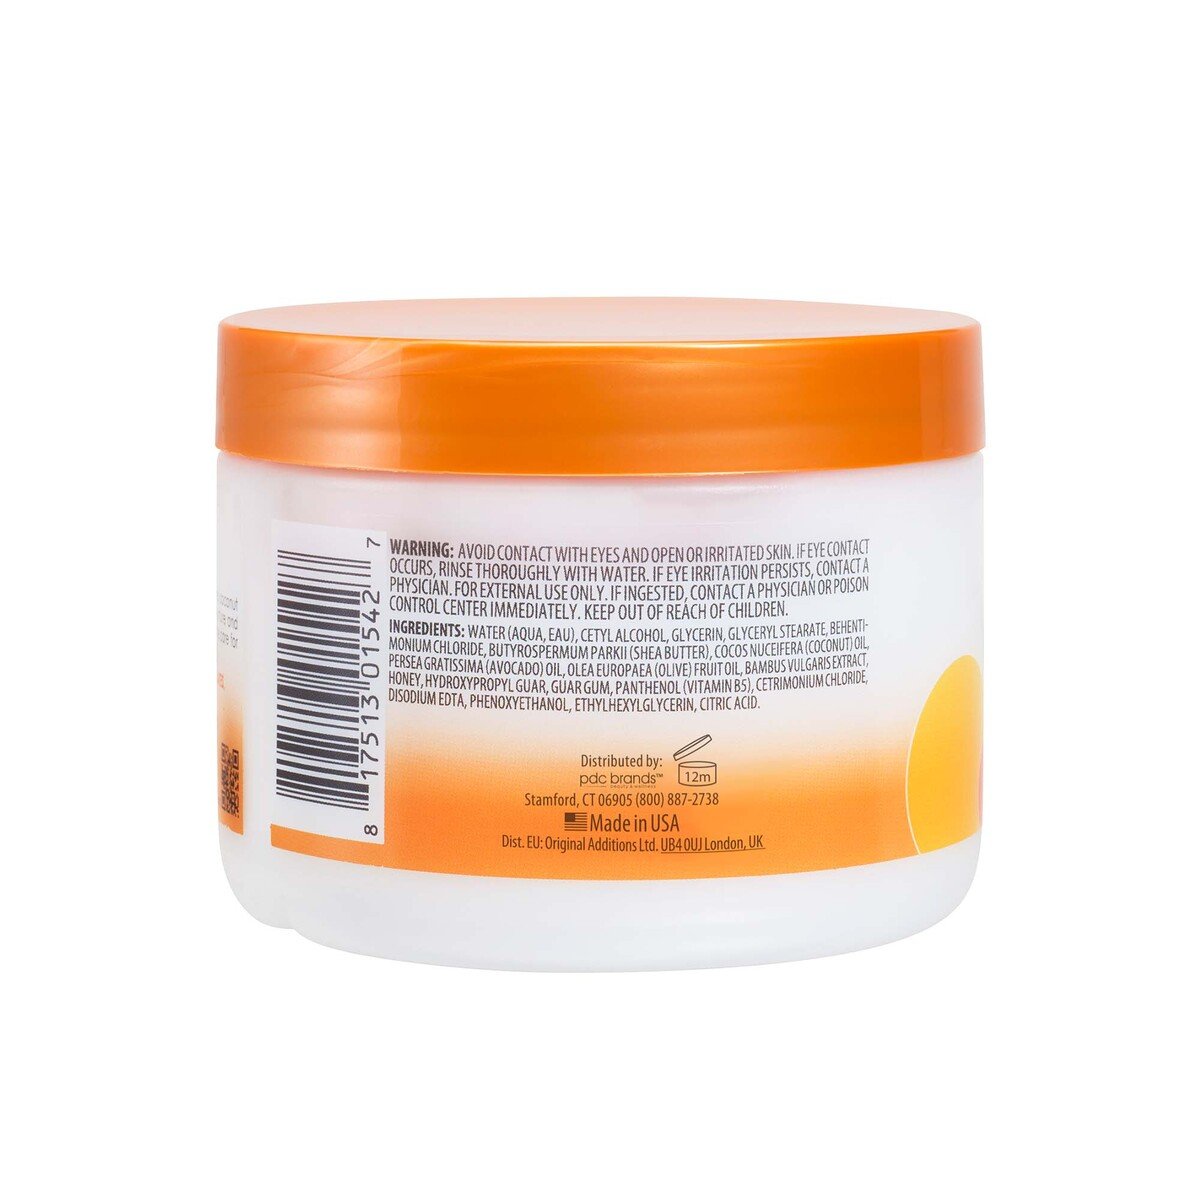 Cantu Care for Kids Leave-in Conditioner 283 g